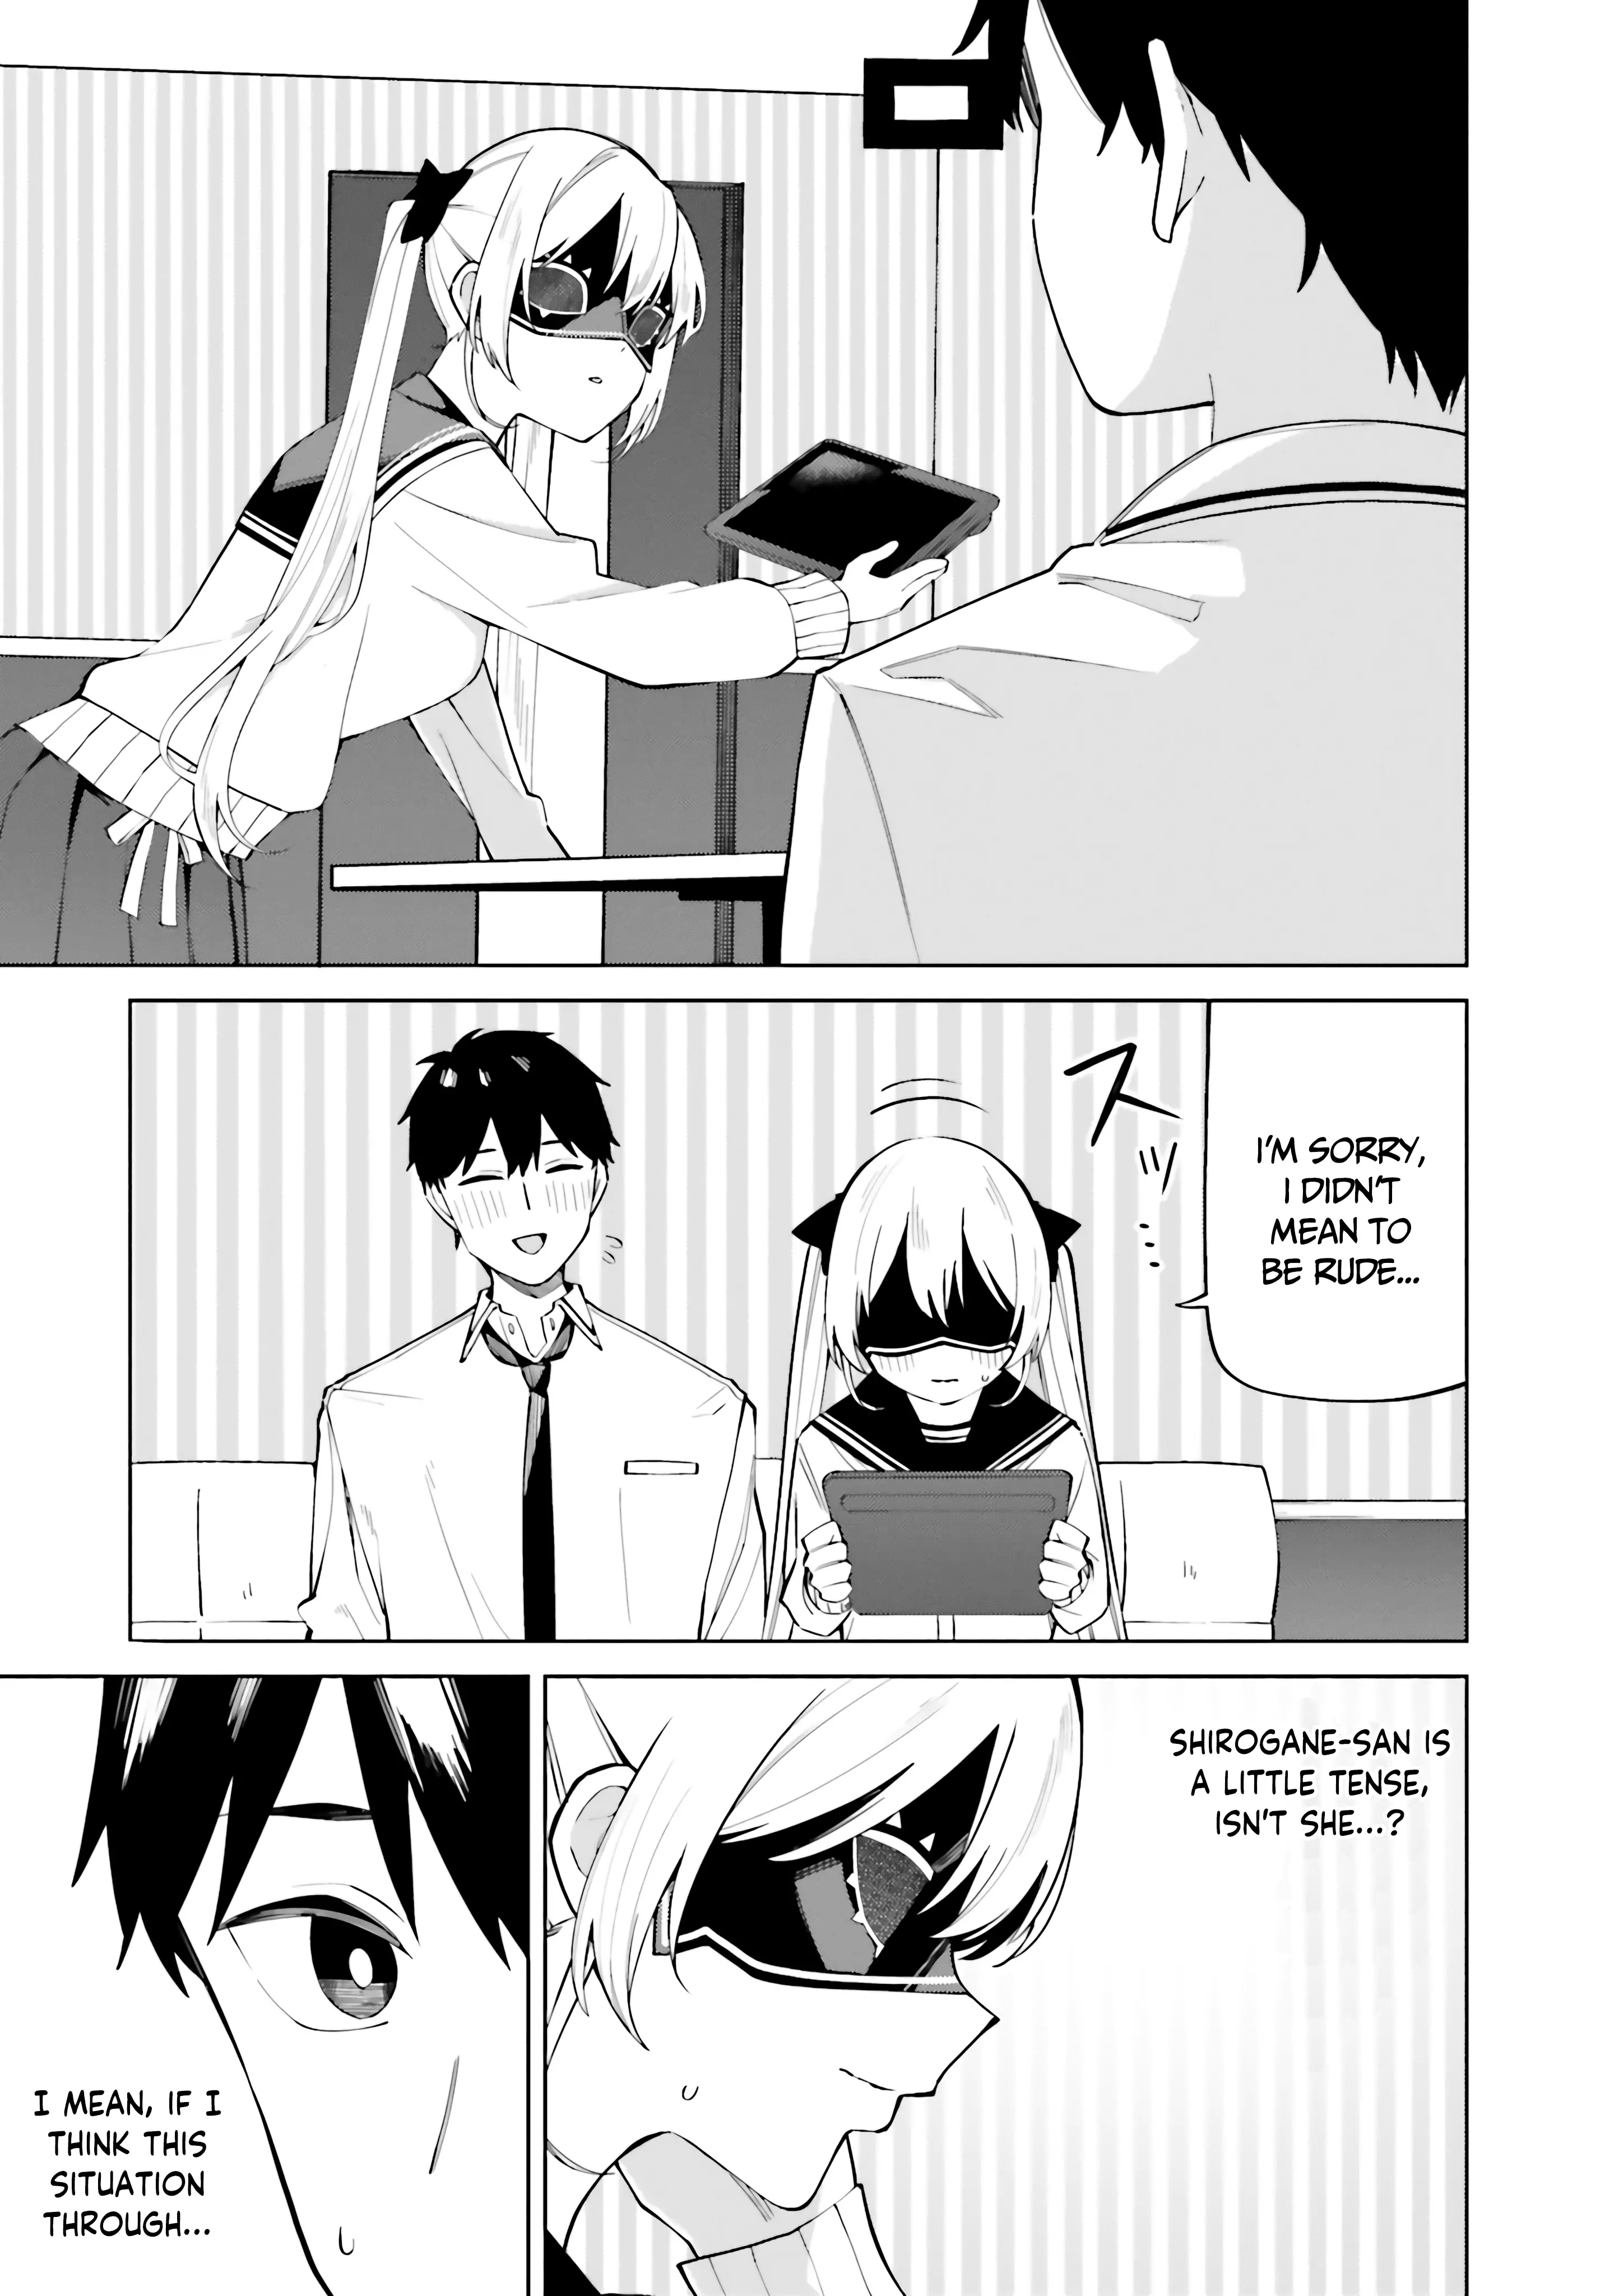 I Don't Understand Shirogane-San's Facial Expression At All - 16 page 20-e218d3c4